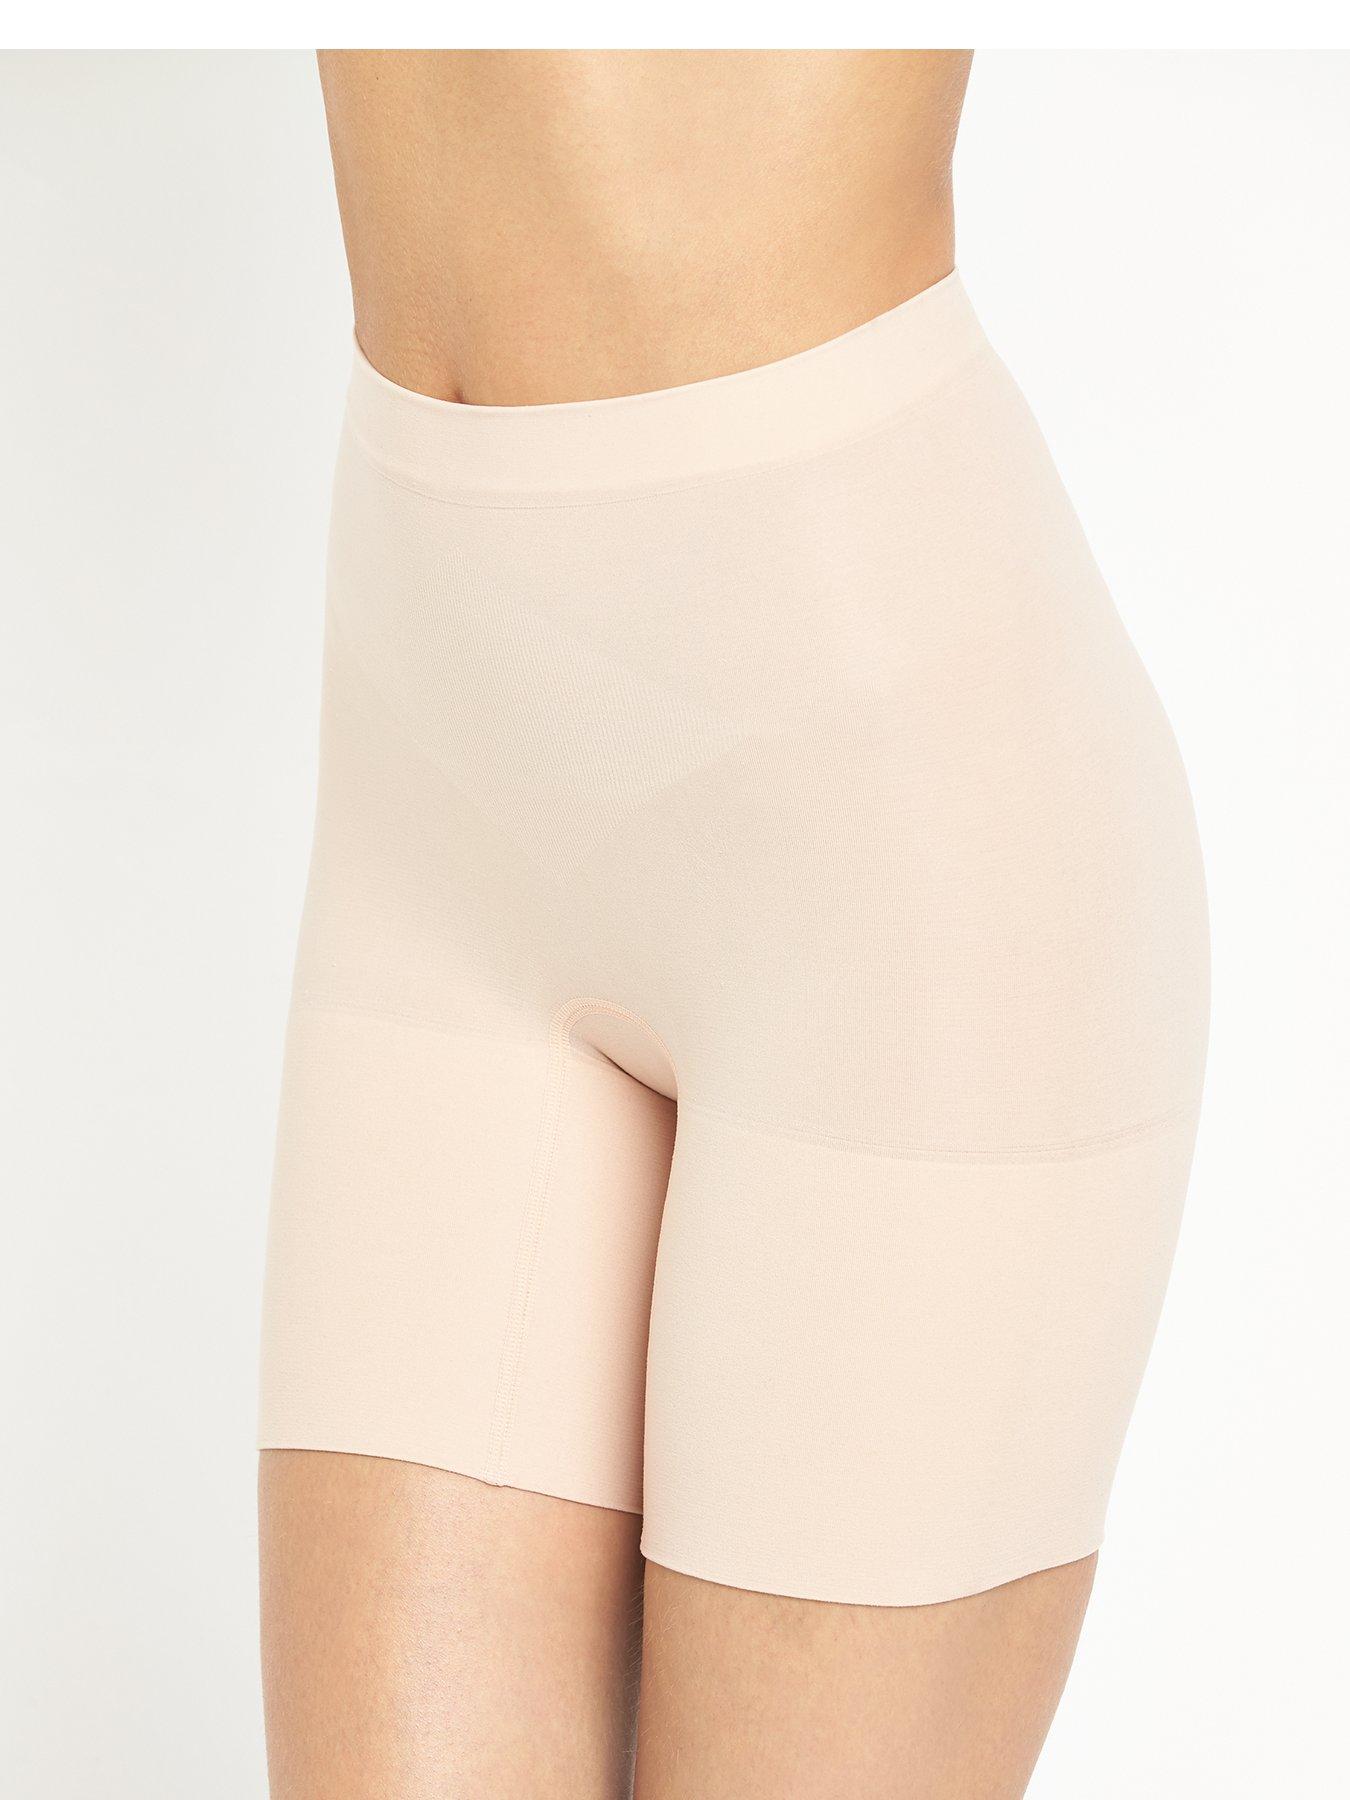 Spanx Seamless Shaping short in mink